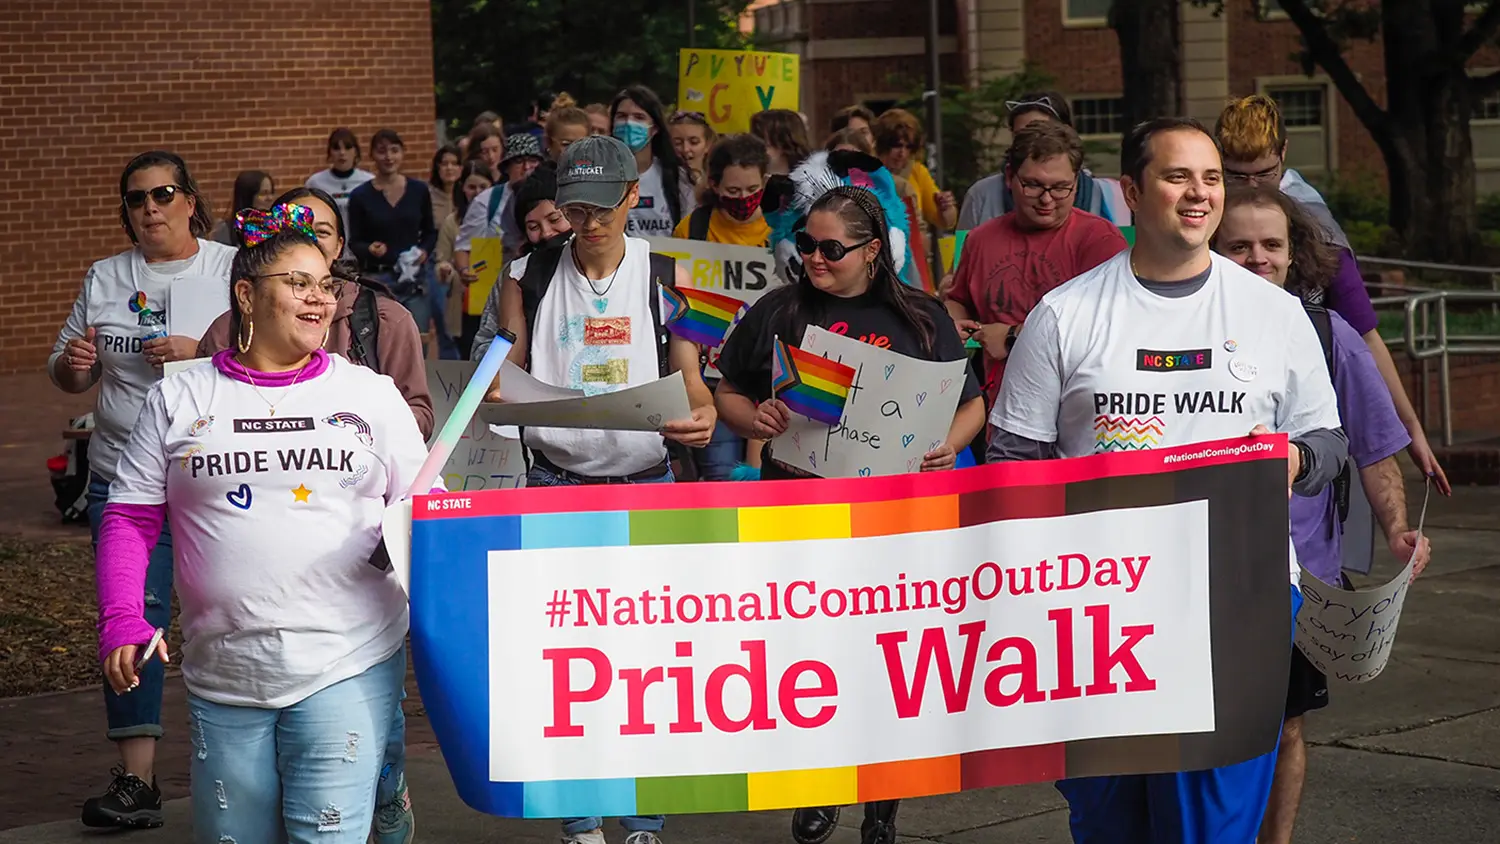 A crowd of students, staff and community members parade through campus during the Pride Walk event.